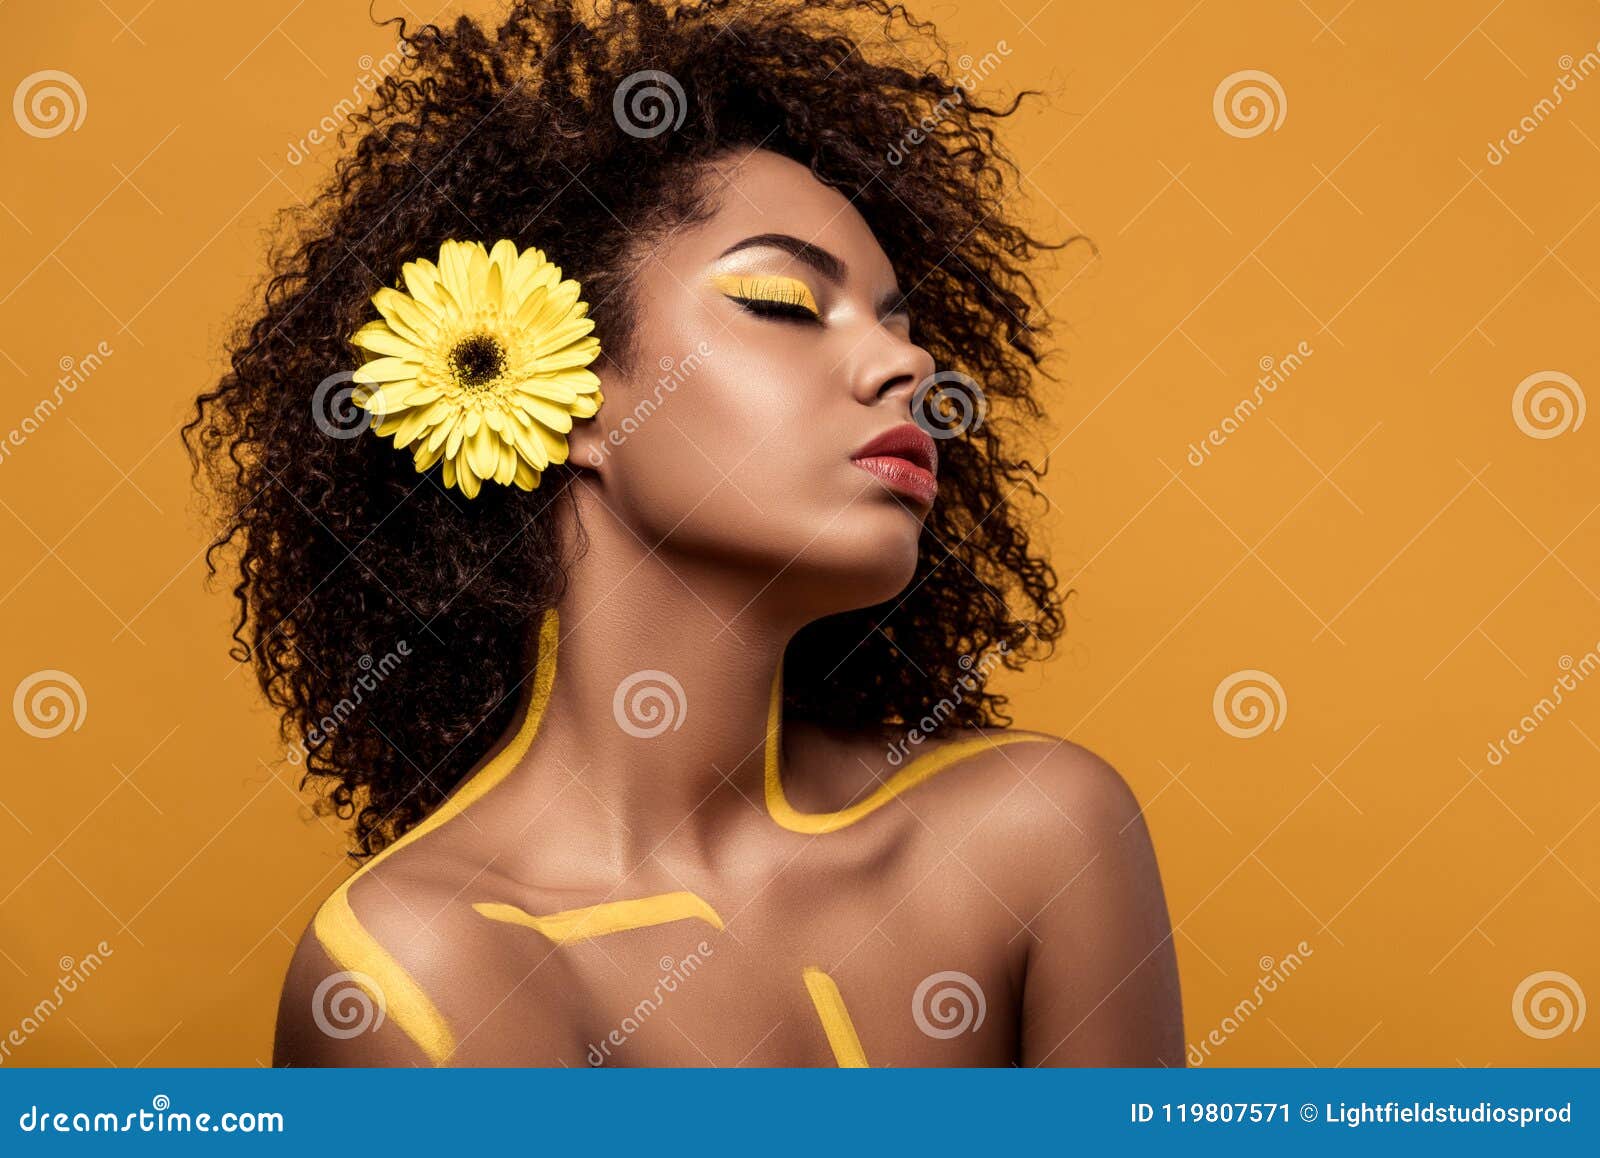 Attractive Young African American Woman with Artistic Make-up and Gerbera  in Hair Stock Image - Image of beauty, fashionable: 119807571